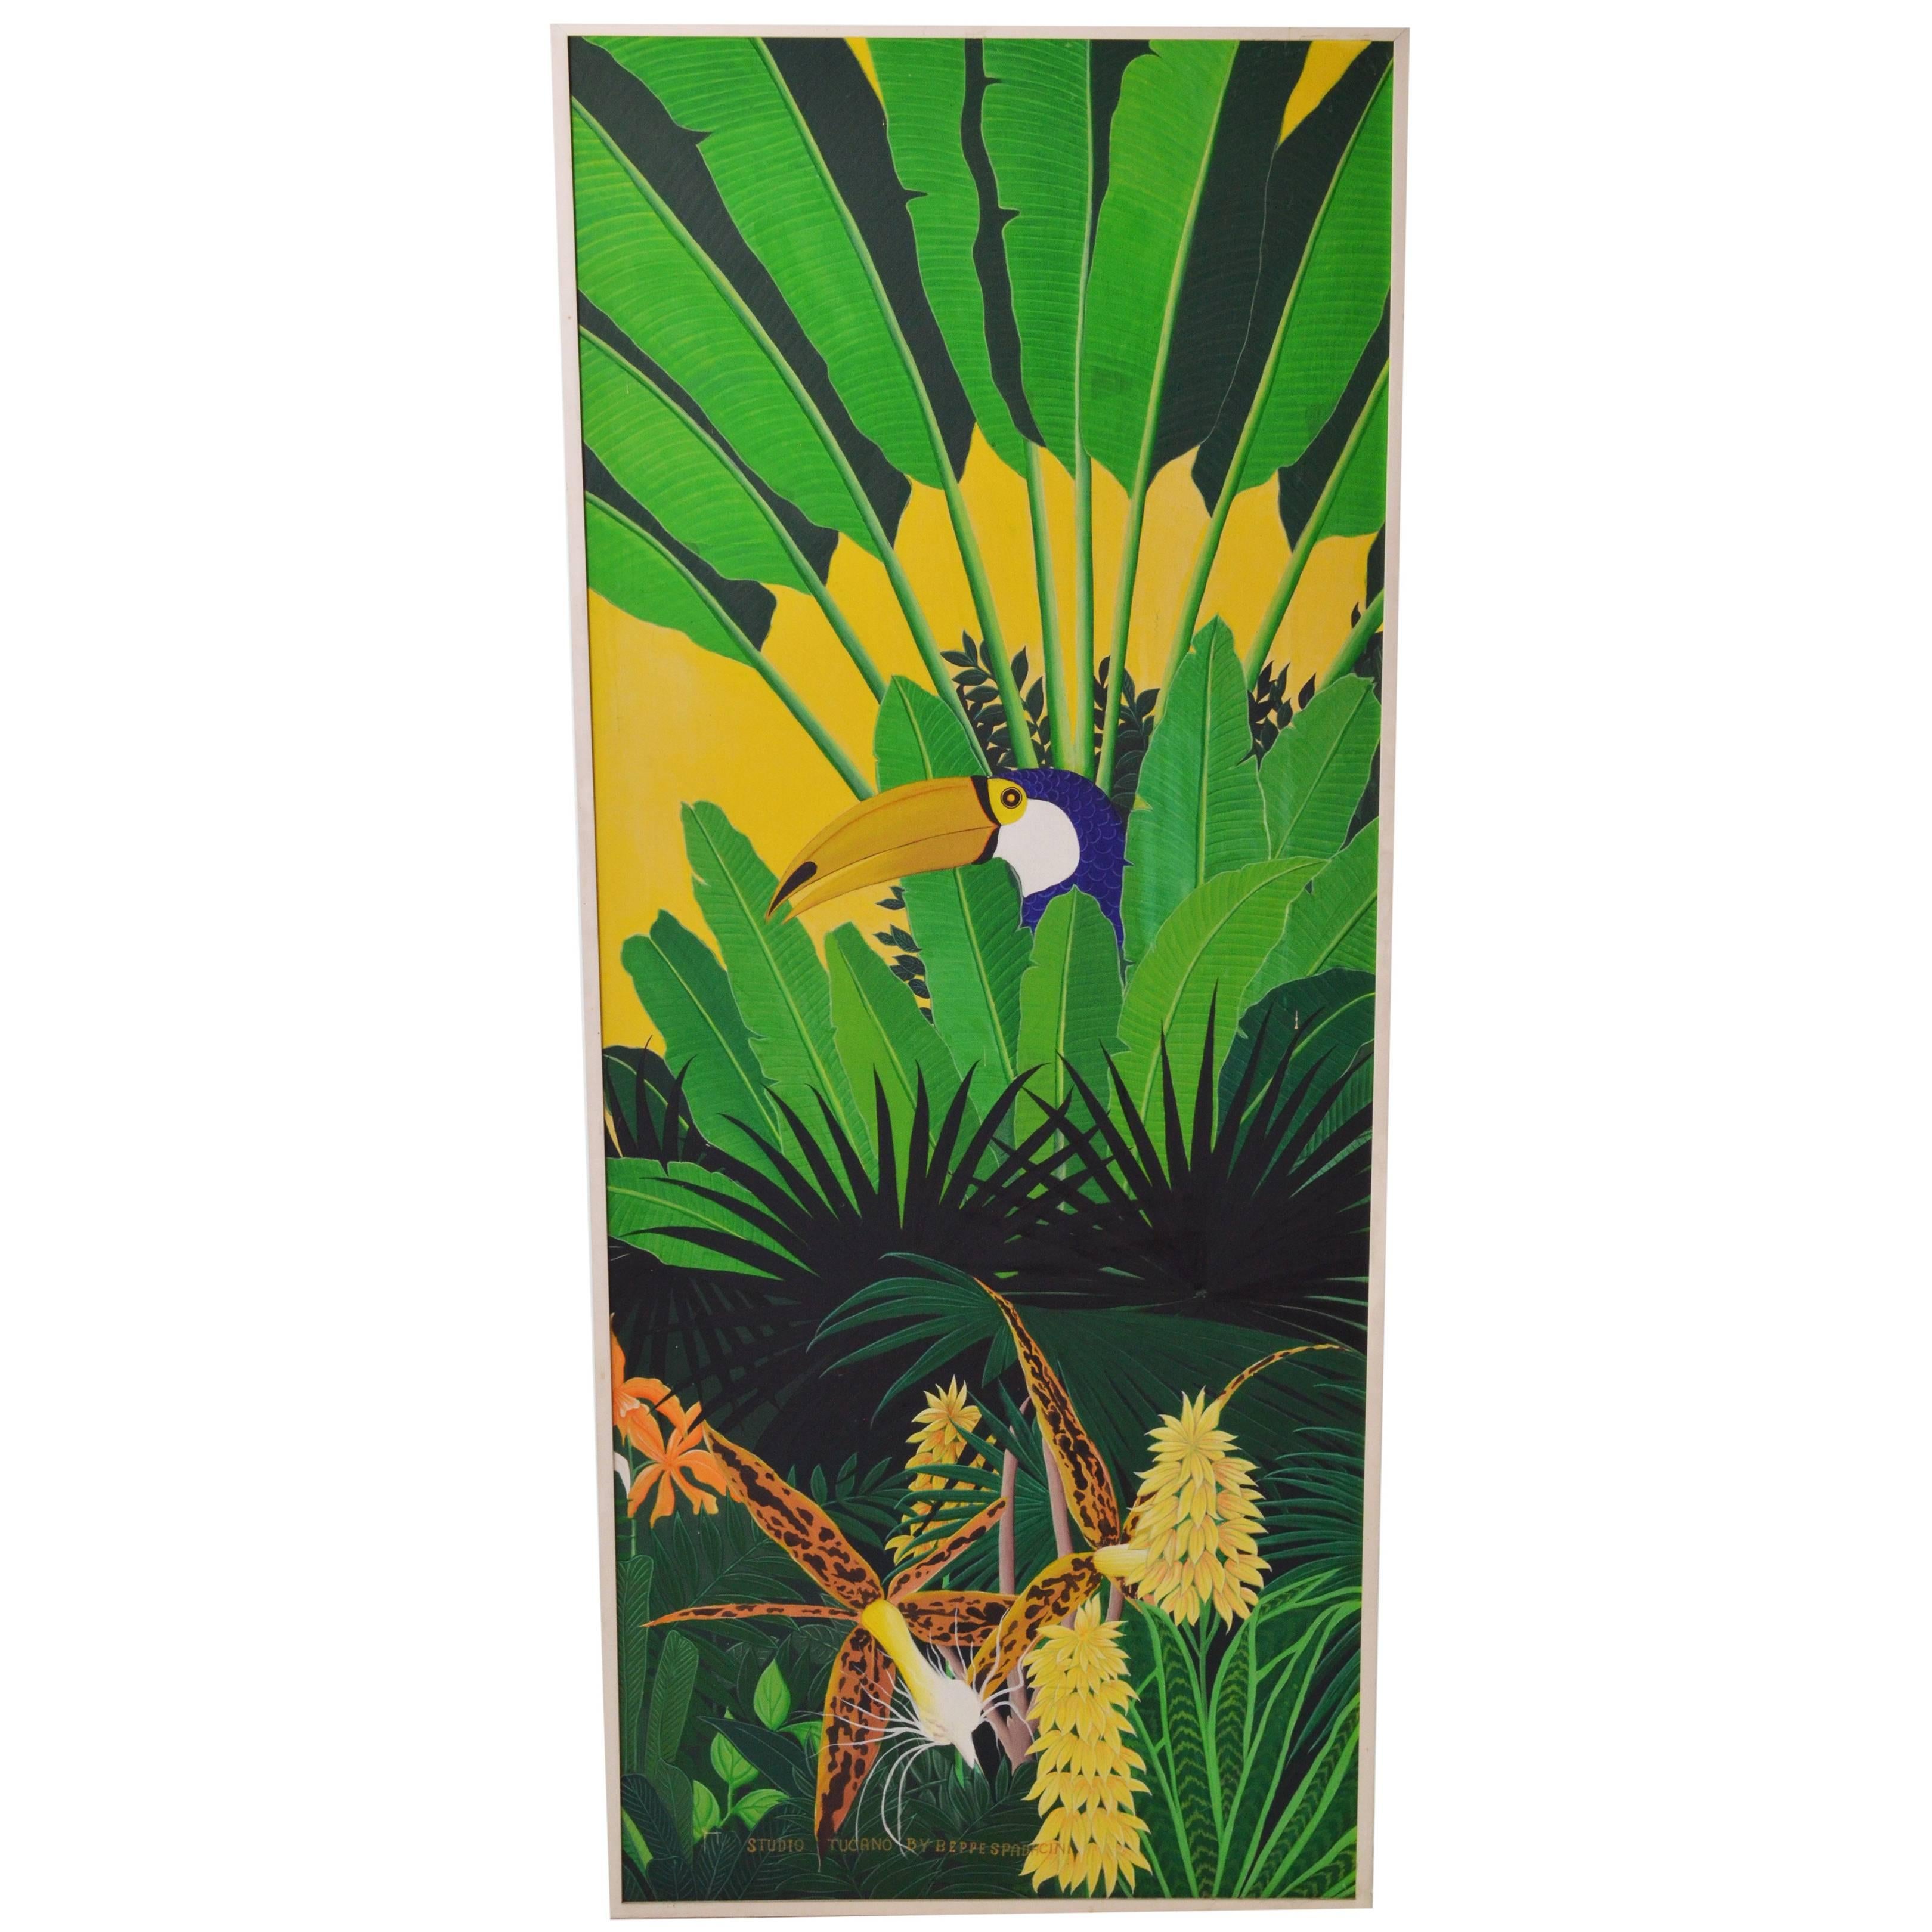 A set of four decorative tropical subject panels. Jungle, birds and a wonderful Tucano are represented in colorful and joyful composition. Oil on canvas framed in black wood frames. In pictures you will find the panels without frames also. the